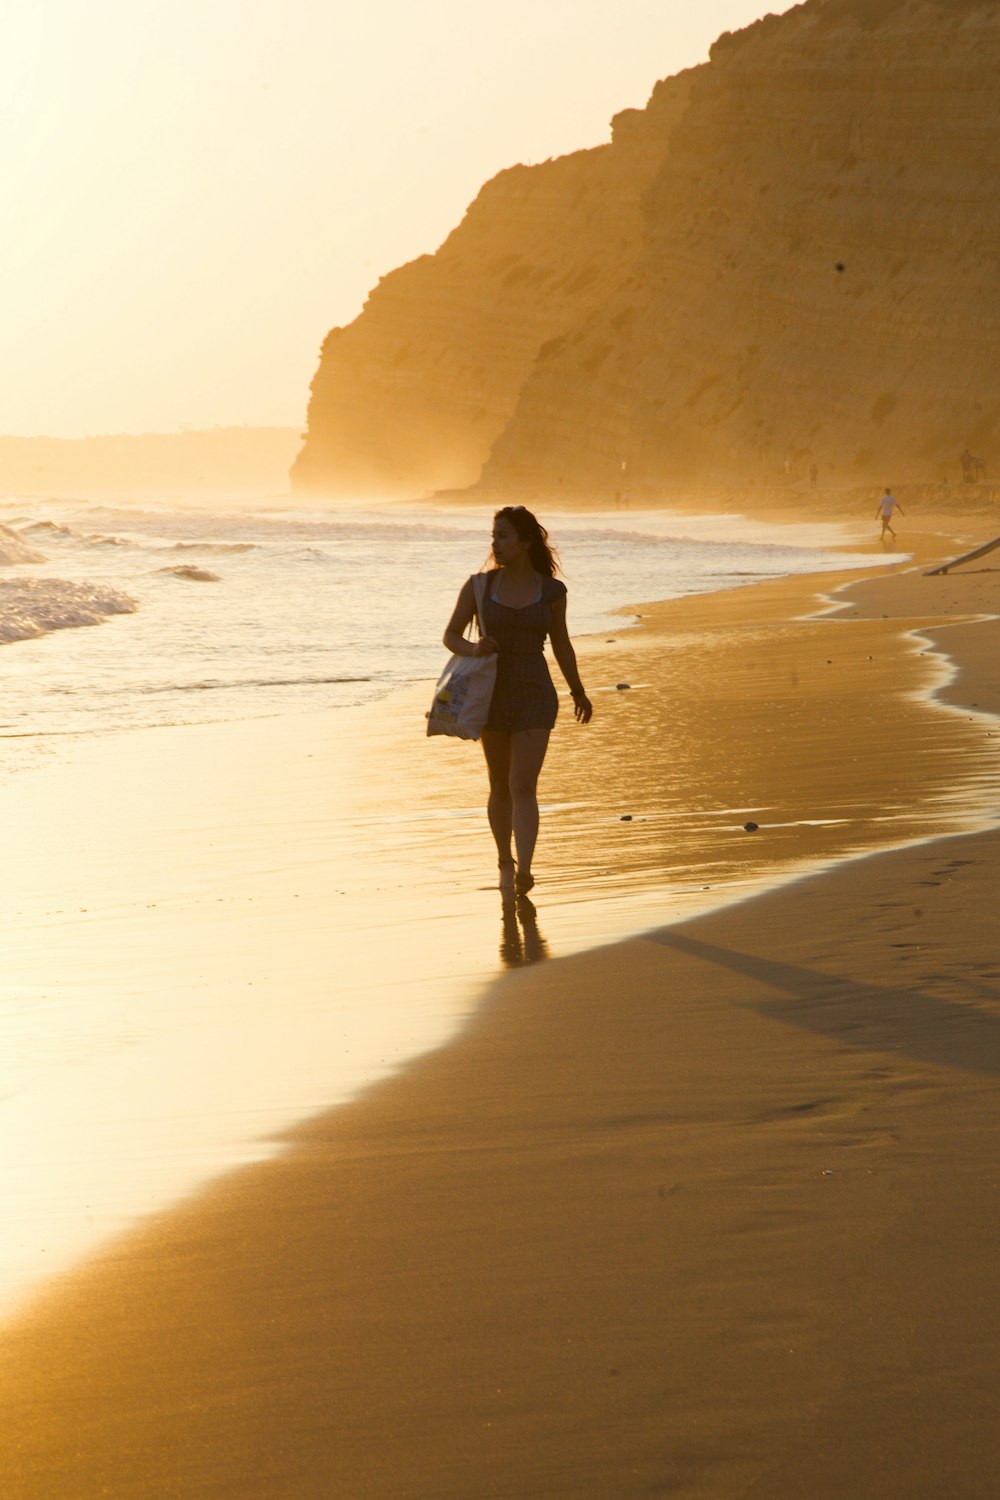 a woman walking on the beach with a surfboard